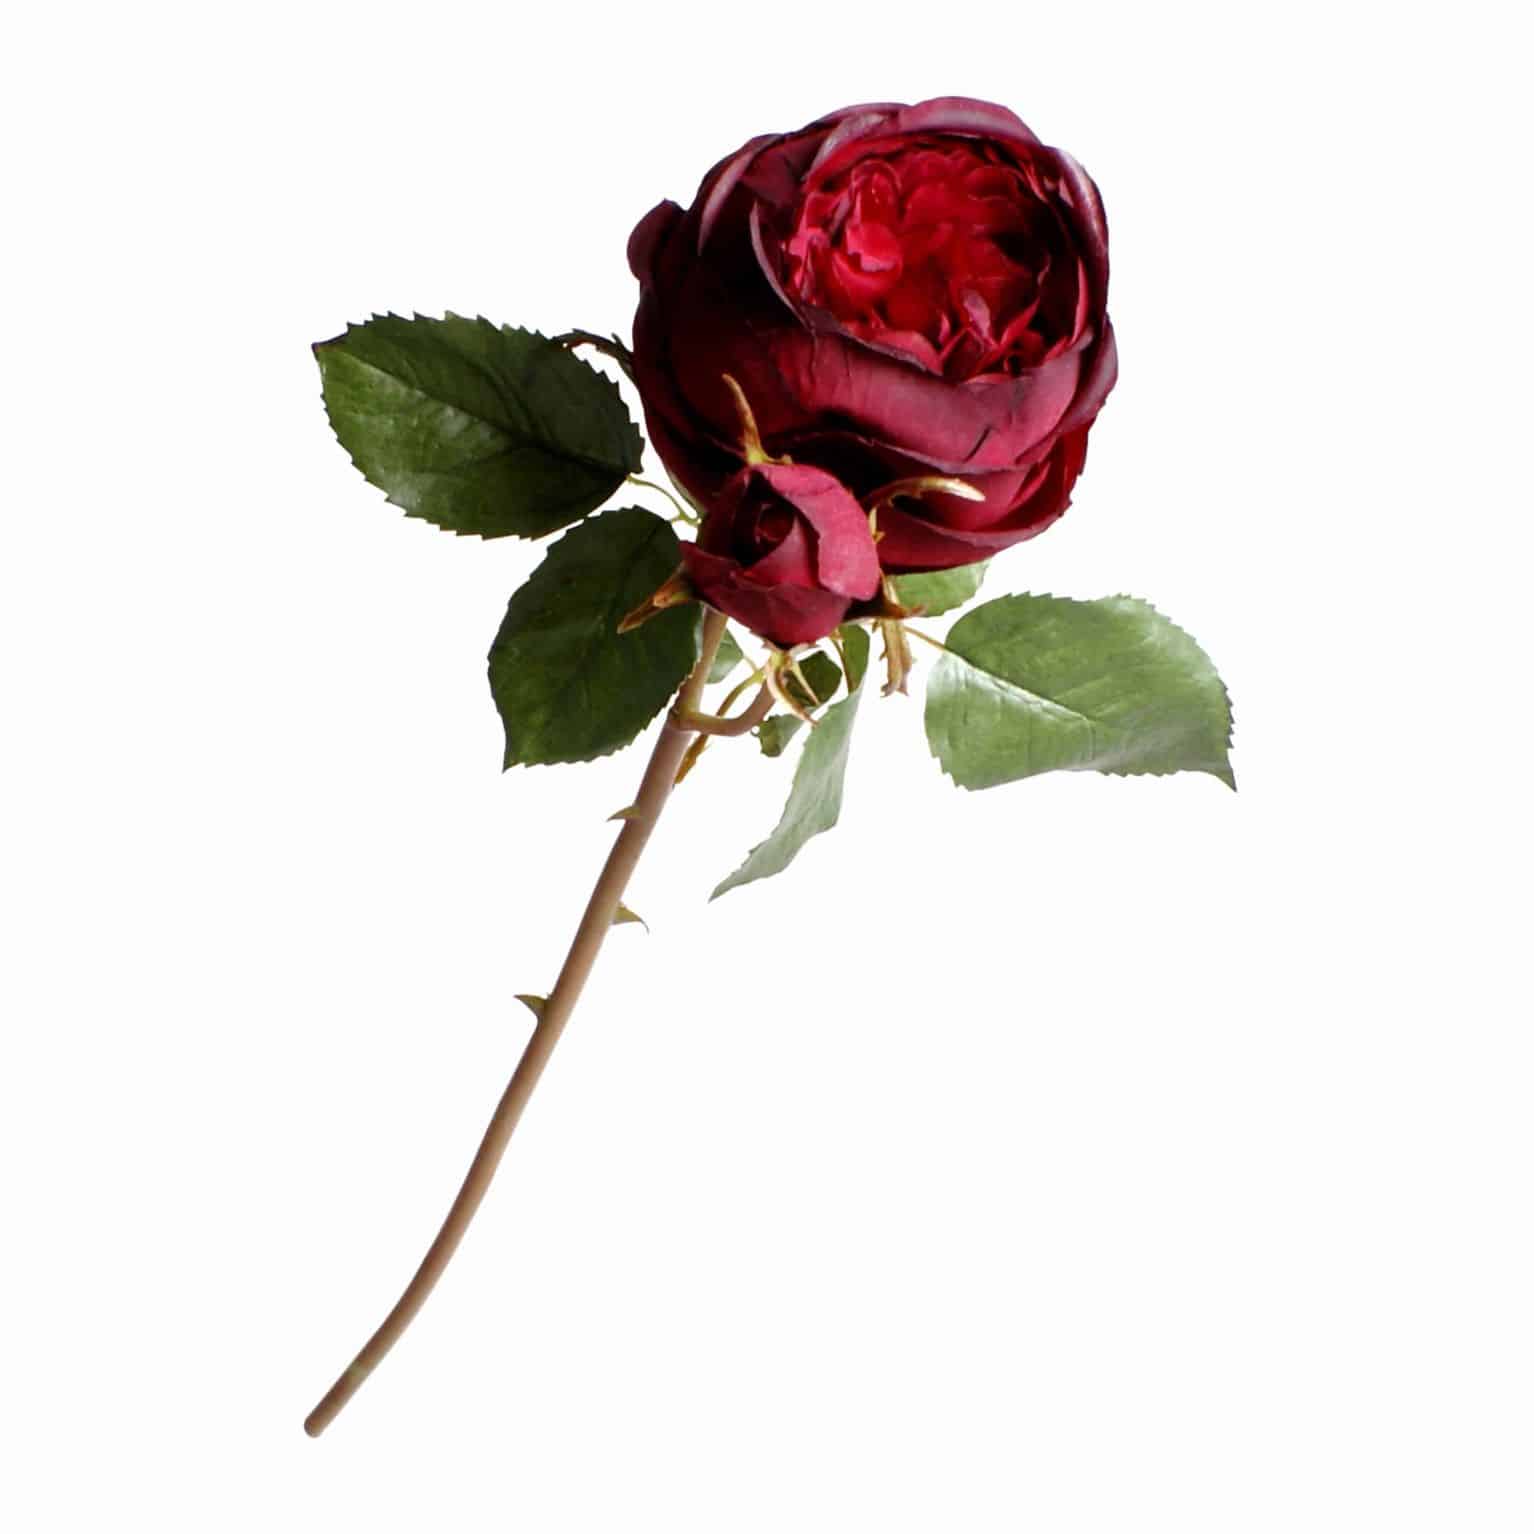 Buy our best silk flowers fully bloomed rose. Deep port red colour of densely layered petals. Perfect for all arrangements and bouquets.